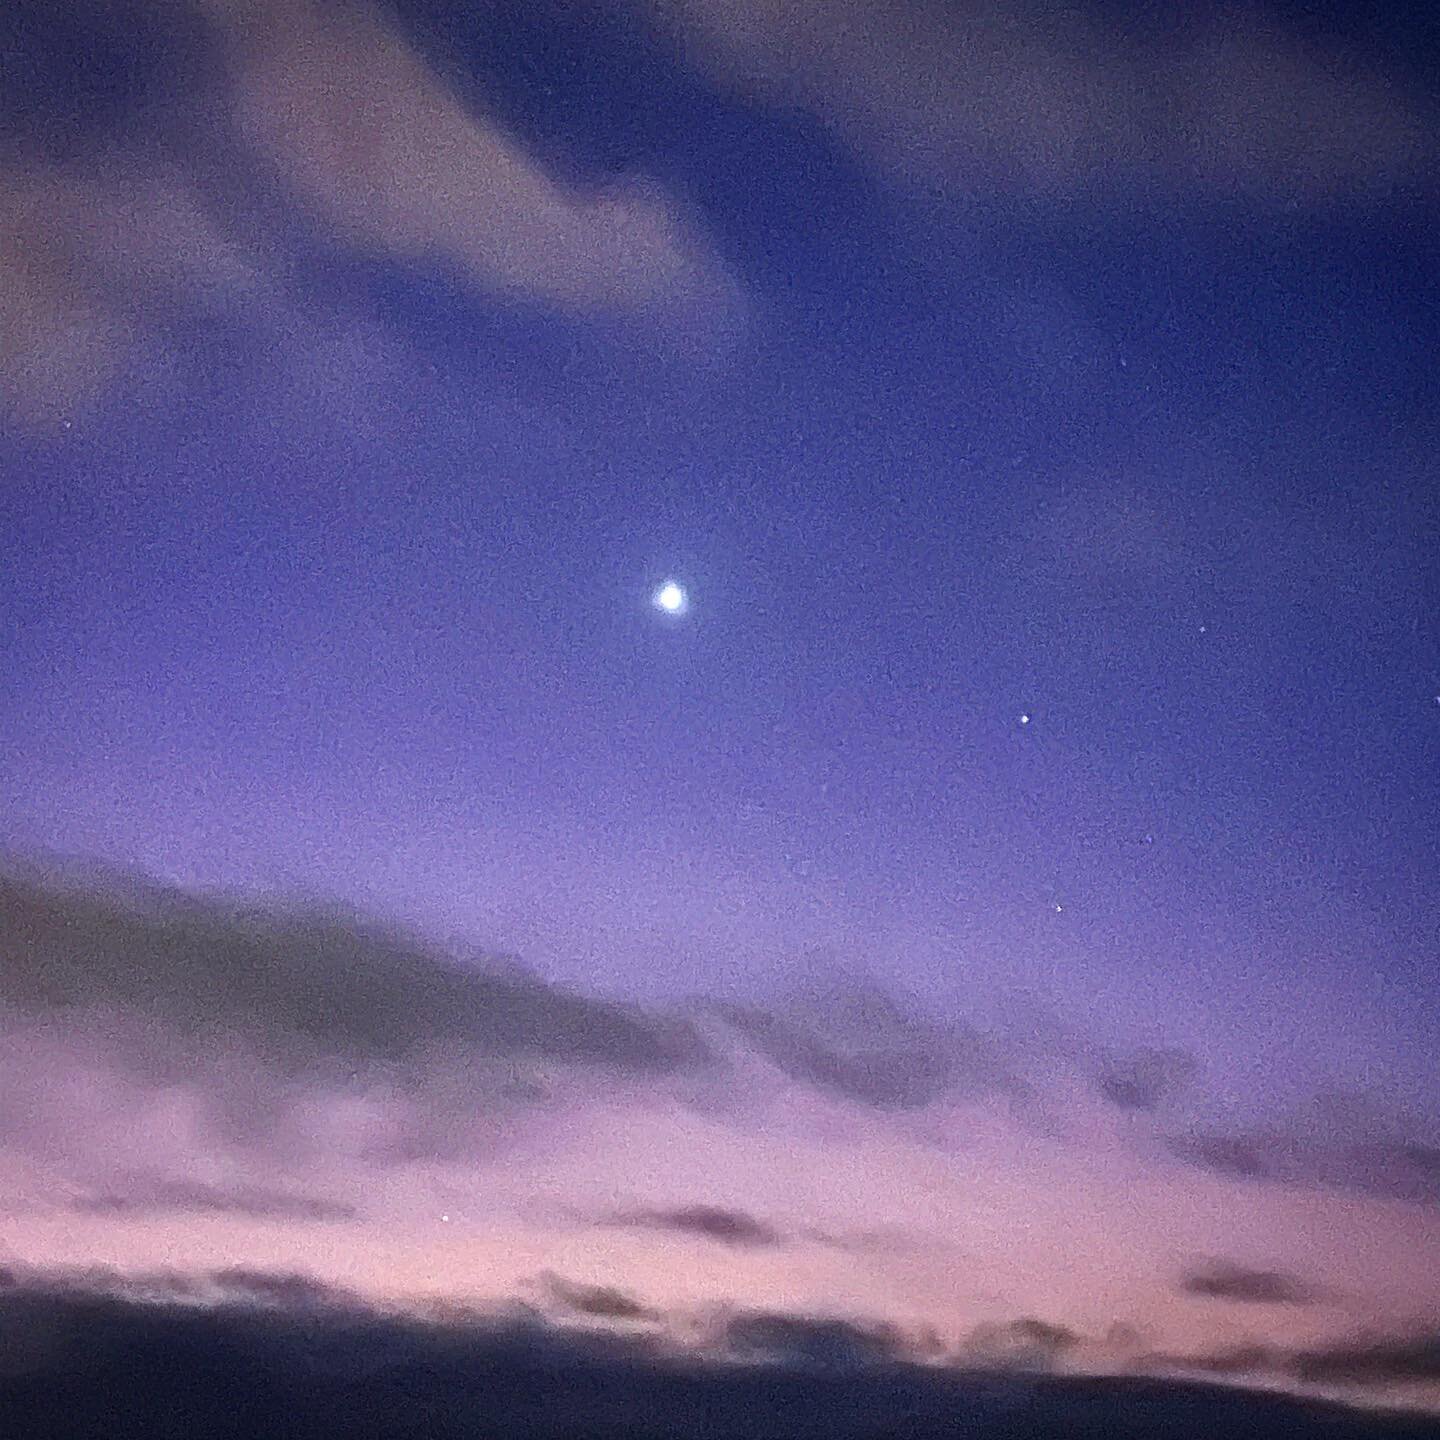 Had a quiet pre-sunrise gathering with the three non-luminary personal planets: Mercury, Venus, and Mars. 

Mercury and Venus have just recently stationed direct after their retrograde retreats, and are bringing some forward momentum to the realms of